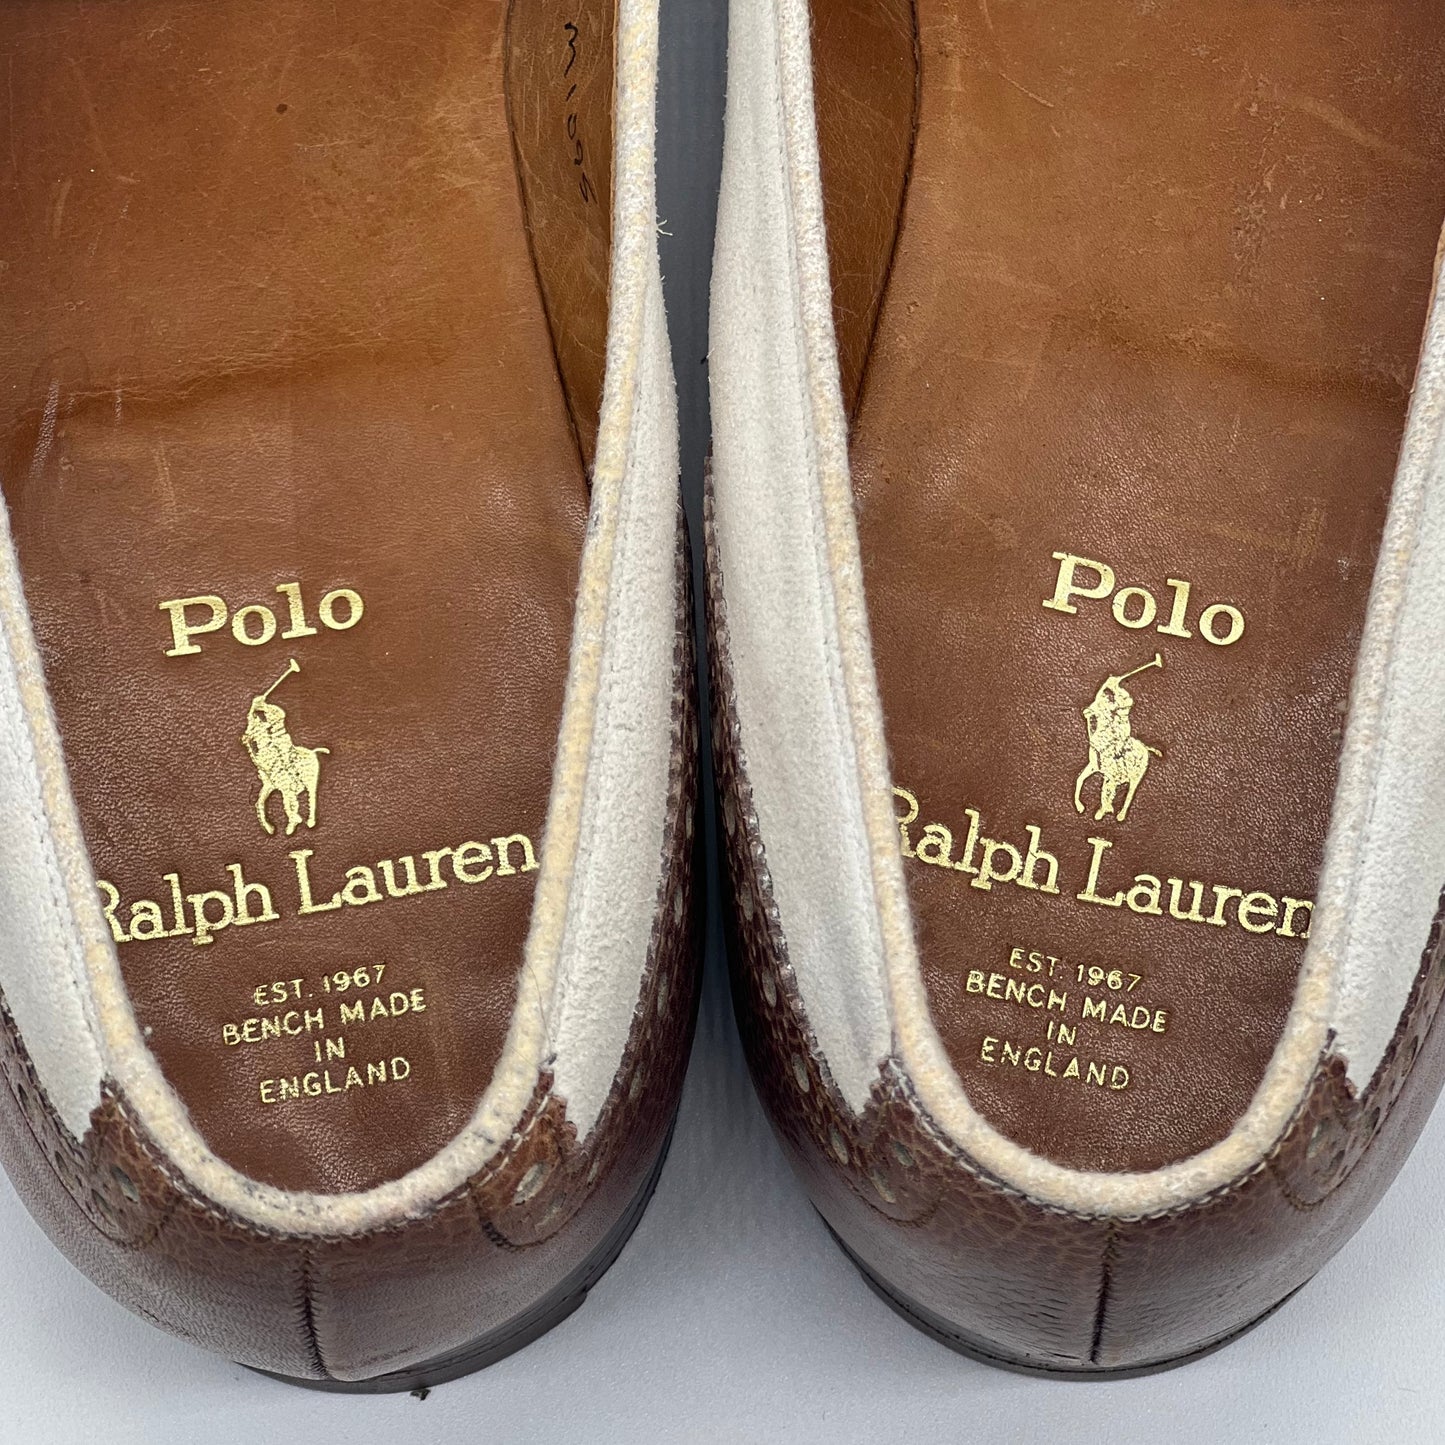 Vintage 90s POLO Ralph Lauren Men's Spectator Two Tone Loafers Fringe Tassle - Bench Made in England - Size 8 1/2 D